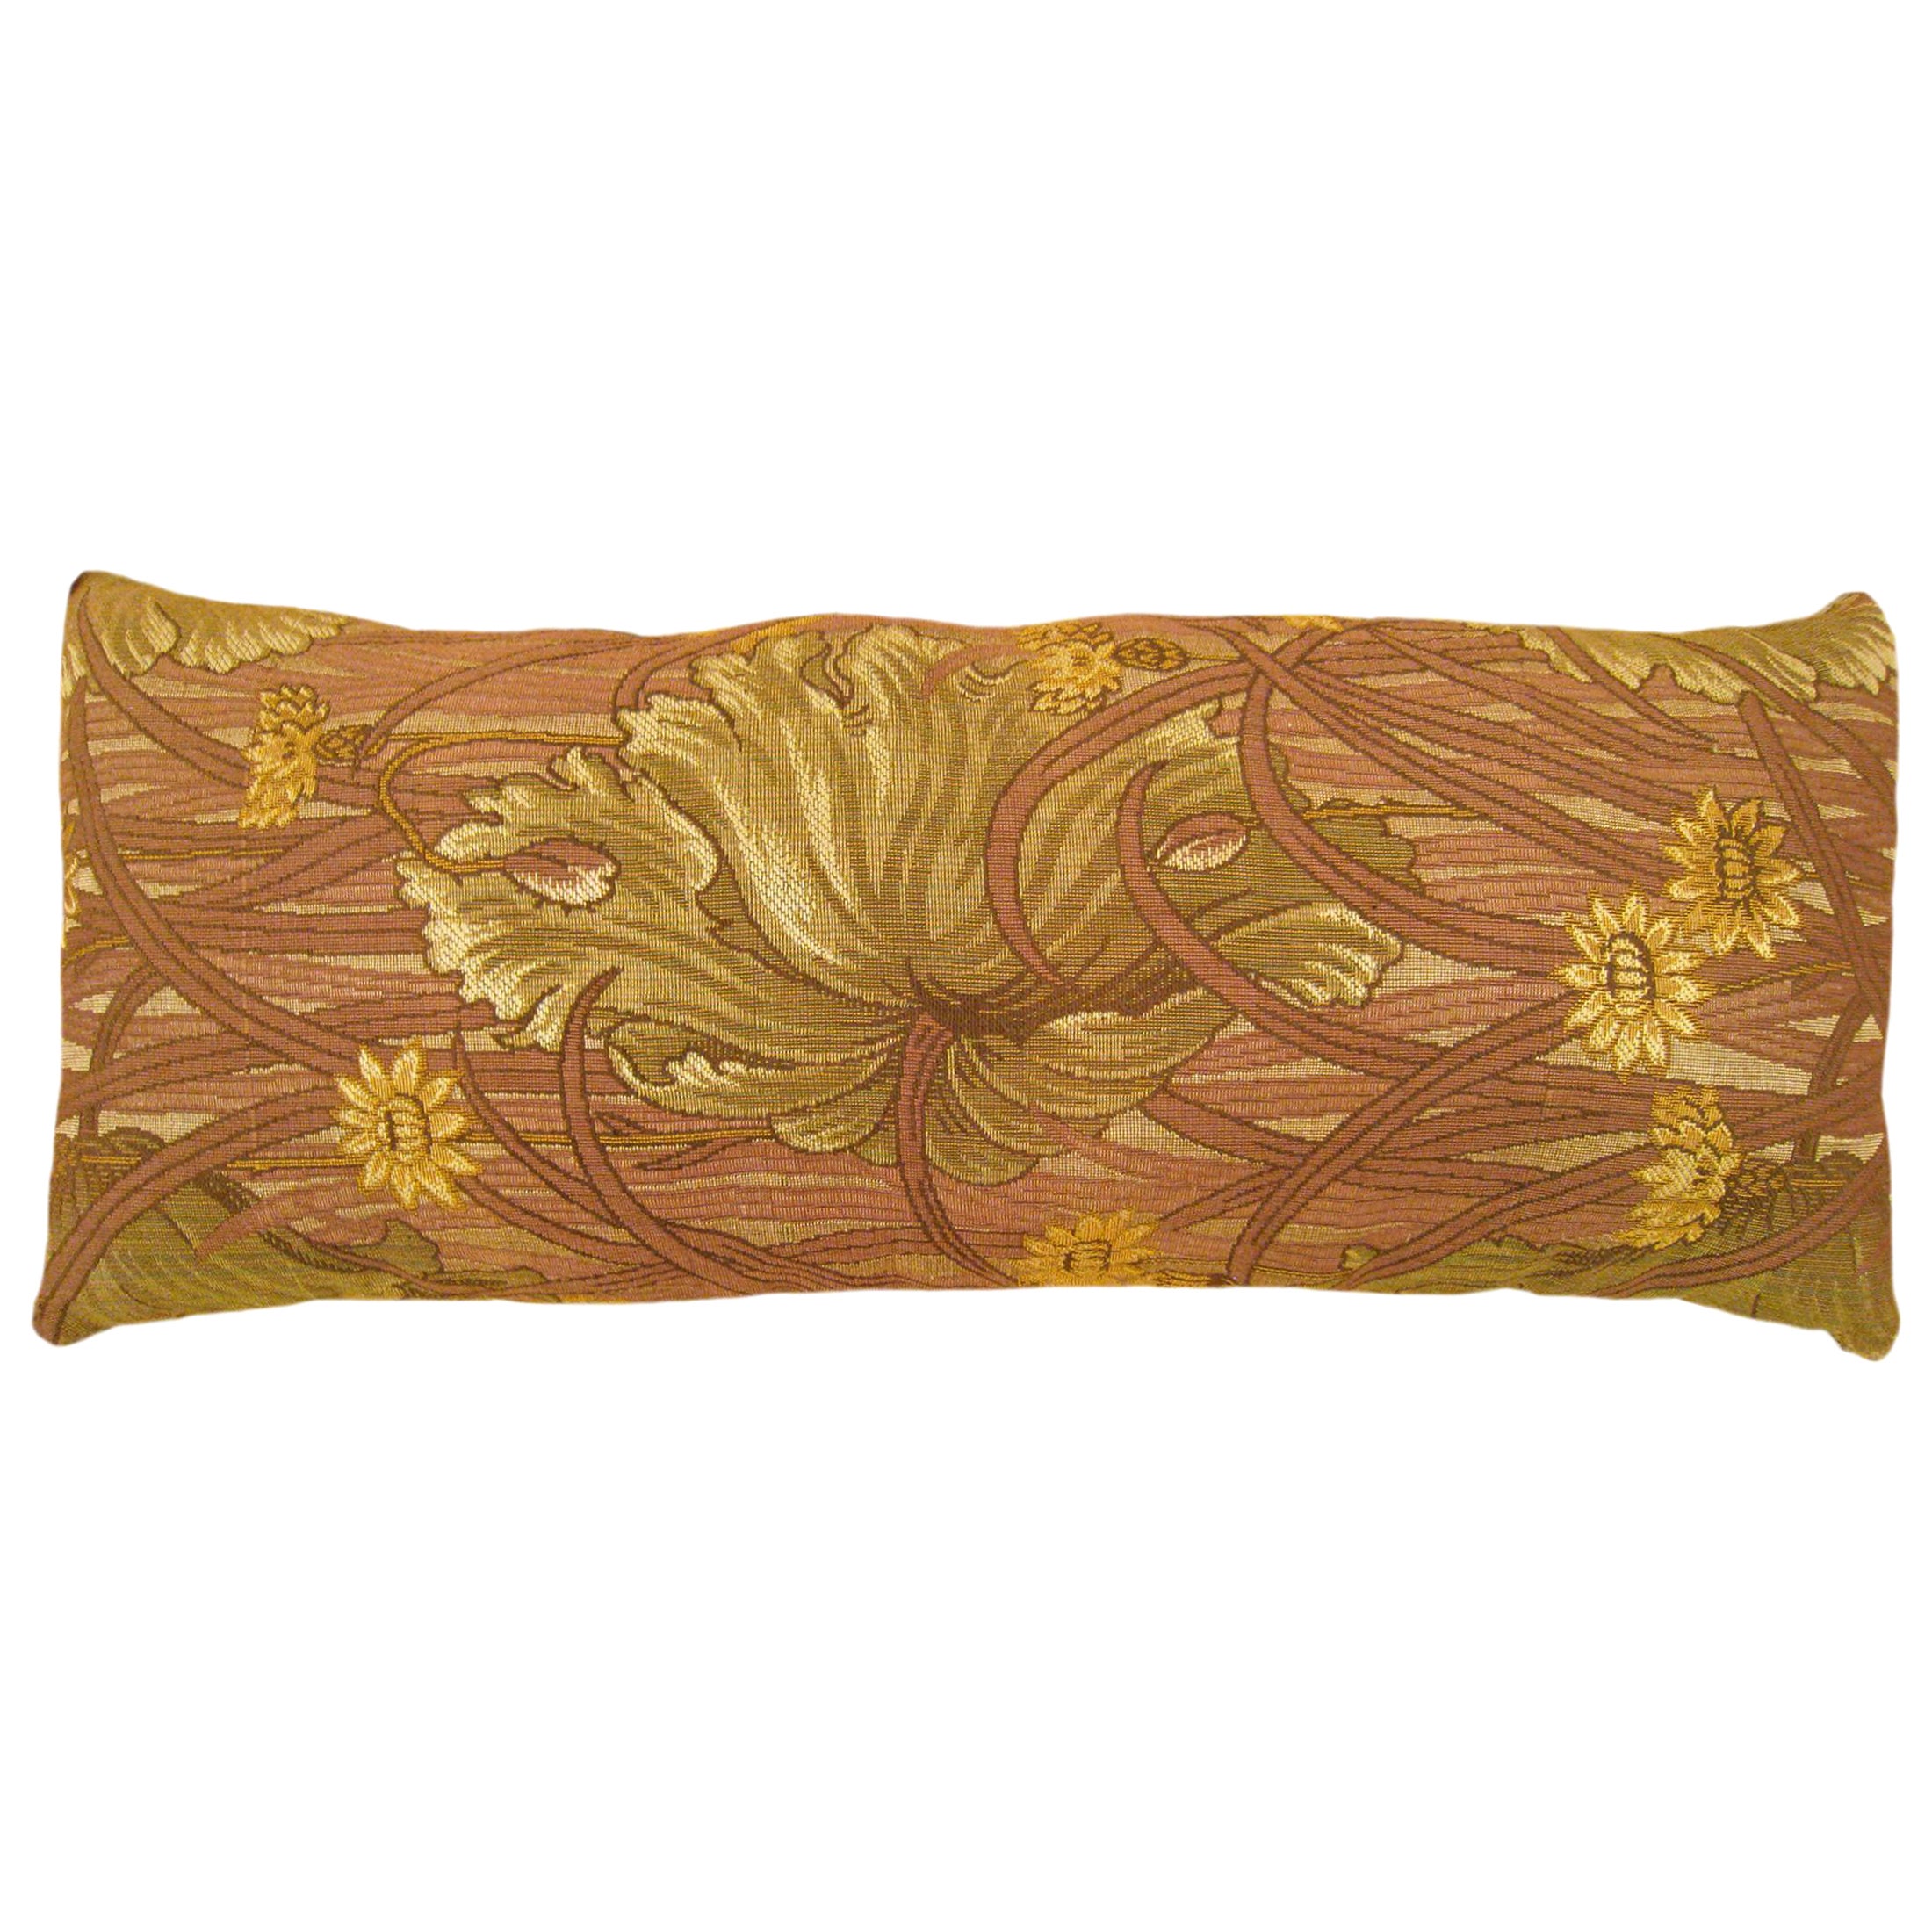 Decorative Antique Jacquard Tapestry Pillow with a Garden Design Allover For Sale